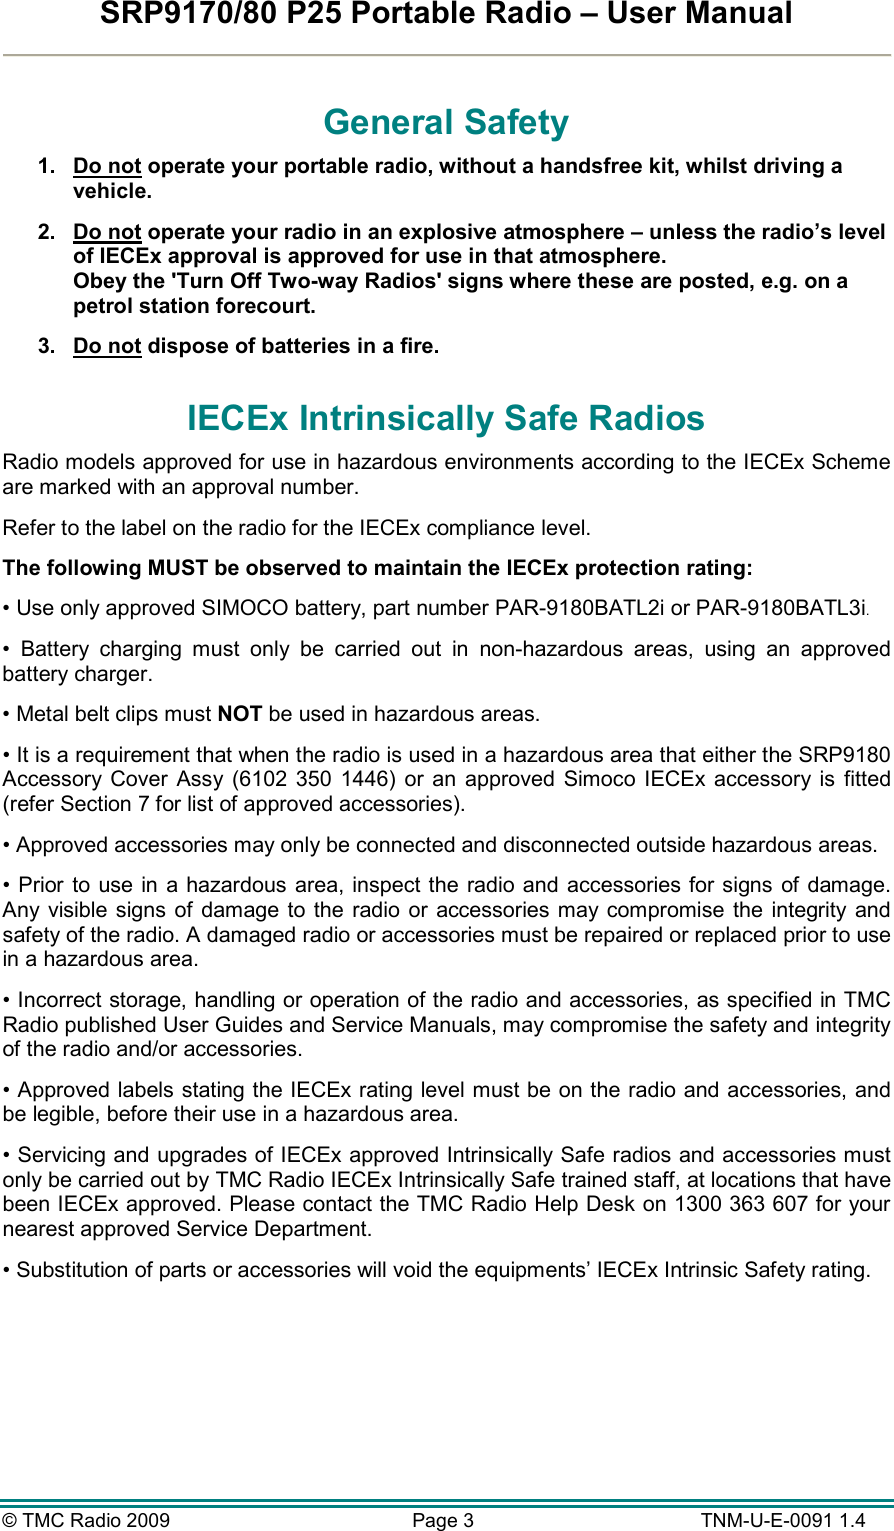 SRP9170/80 P25 Portable Radio – User Manual  © TMC Radio 2009  Page 3   TNM-U-E-0091 1.4 General Safety 1.  Do not operate your portable radio, without a handsfree kit, whilst driving a vehicle. 2.  Do not operate your radio in an explosive atmosphere – unless the radio’s level of IECEx approval is approved for use in that atmosphere. Obey the &apos;Turn Off Two-way Radios&apos; signs where these are posted, e.g. on a petrol station forecourt. 3.  Do not dispose of batteries in a fire. IECEx Intrinsically Safe Radios Radio models approved for use in hazardous environments according to the IECEx Scheme are marked with an approval number. Refer to the label on the radio for the IECEx compliance level. The following MUST be observed to maintain the IECEx protection rating: • Use only approved SIMOCO battery, part number PAR-9180BATL2i or PAR-9180BATL3i. •  Battery  charging  must  only  be  carried  out  in  non-hazardous  areas,  using  an  approved battery charger. • Metal belt clips must NOT be used in hazardous areas. • It is a requirement that when the radio is used in a hazardous area that either the SRP9180 Accessory Cover  Assy (6102 350  1446)  or  an  approved  Simoco IECEx  accessory  is  fitted (refer Section 7 for list of approved accessories). • Approved accessories may only be connected and disconnected outside hazardous areas. • Prior to  use in a hazardous area, inspect the radio and  accessories for signs of damage. Any visible  signs of damage to the radio or  accessories may compromise  the  integrity and safety of the radio. A damaged radio or accessories must be repaired or replaced prior to use in a hazardous area. • Incorrect storage, handling or operation of the radio and accessories, as specified in TMC Radio published User Guides and Service Manuals, may compromise the safety and integrity of the radio and/or accessories. • Approved labels stating the IECEx rating level must be on the radio and accessories, and be legible, before their use in a hazardous area. • Servicing and upgrades of IECEx approved Intrinsically Safe radios and accessories must only be carried out by TMC Radio IECEx Intrinsically Safe trained staff, at locations that have been IECEx approved. Please contact the TMC Radio Help Desk on 1300 363 607 for your nearest approved Service Department. • Substitution of parts or accessories will void the equipments’ IECEx Intrinsic Safety rating.  